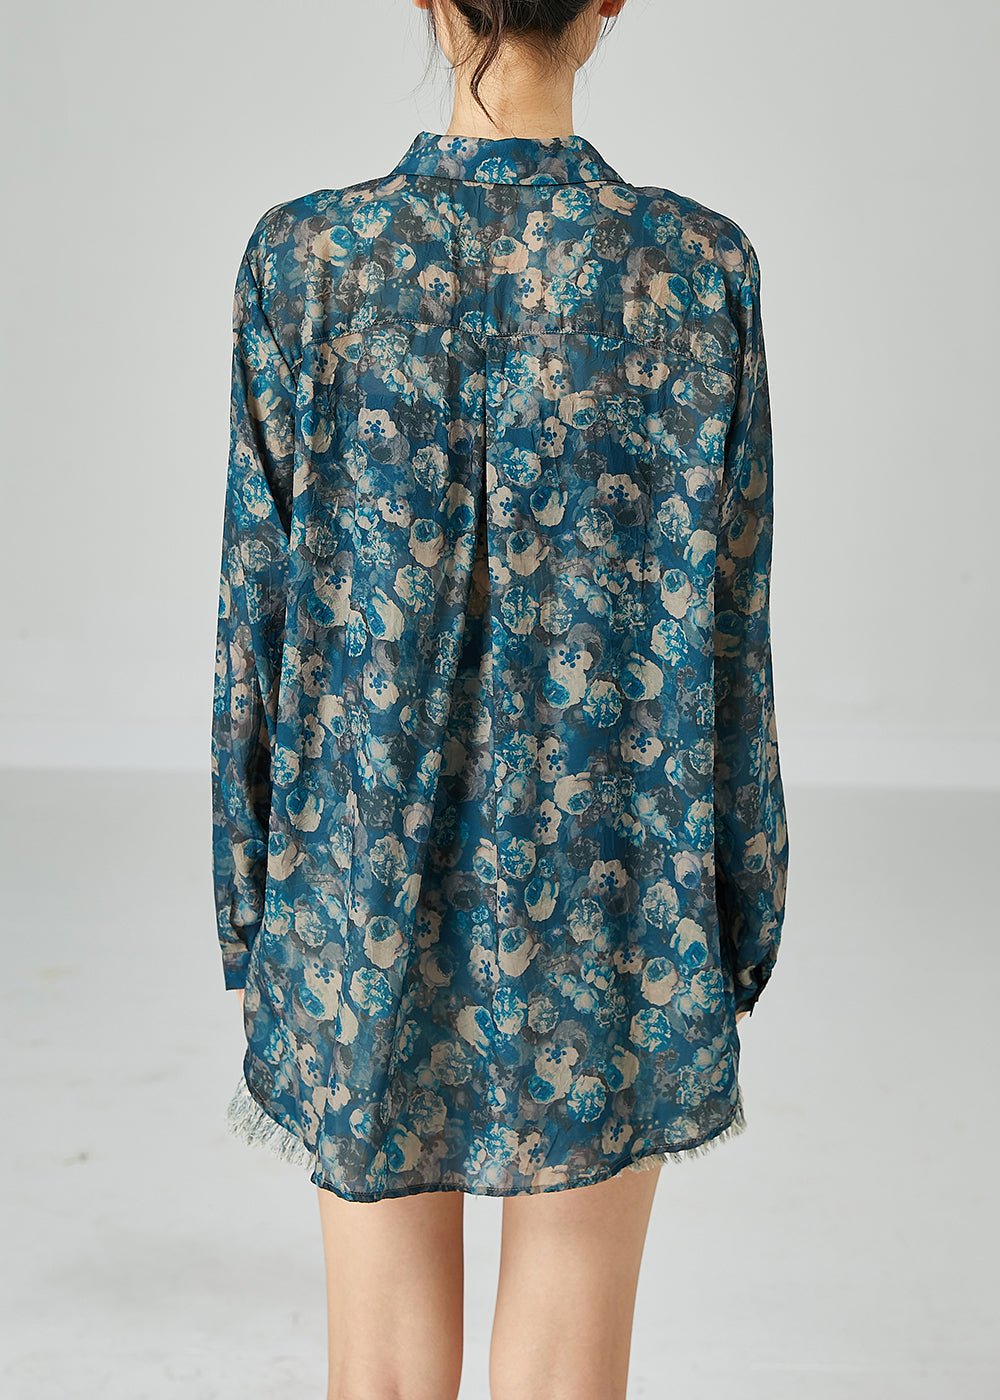 Unique Blue Peter Pan Collar Oversized Print Cotton Shirts Spring LY2444